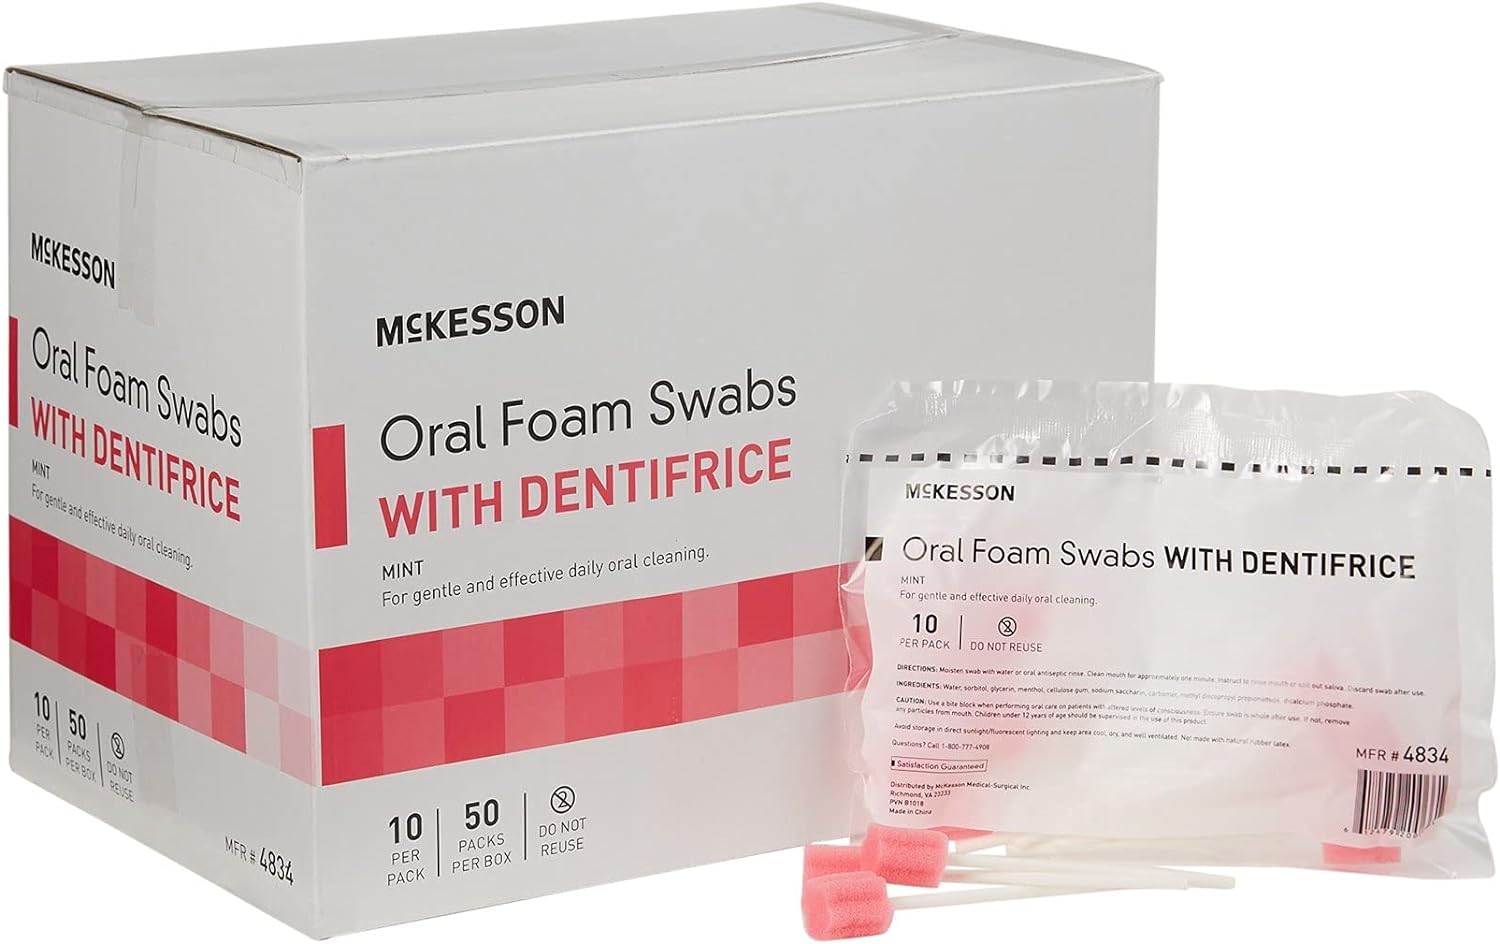 McKesson Oral Foam Swabs with Dentifrice, Gentle and Daily Oral Cleaning, Mint, 10 Count, 100 Packs, 1000 Total